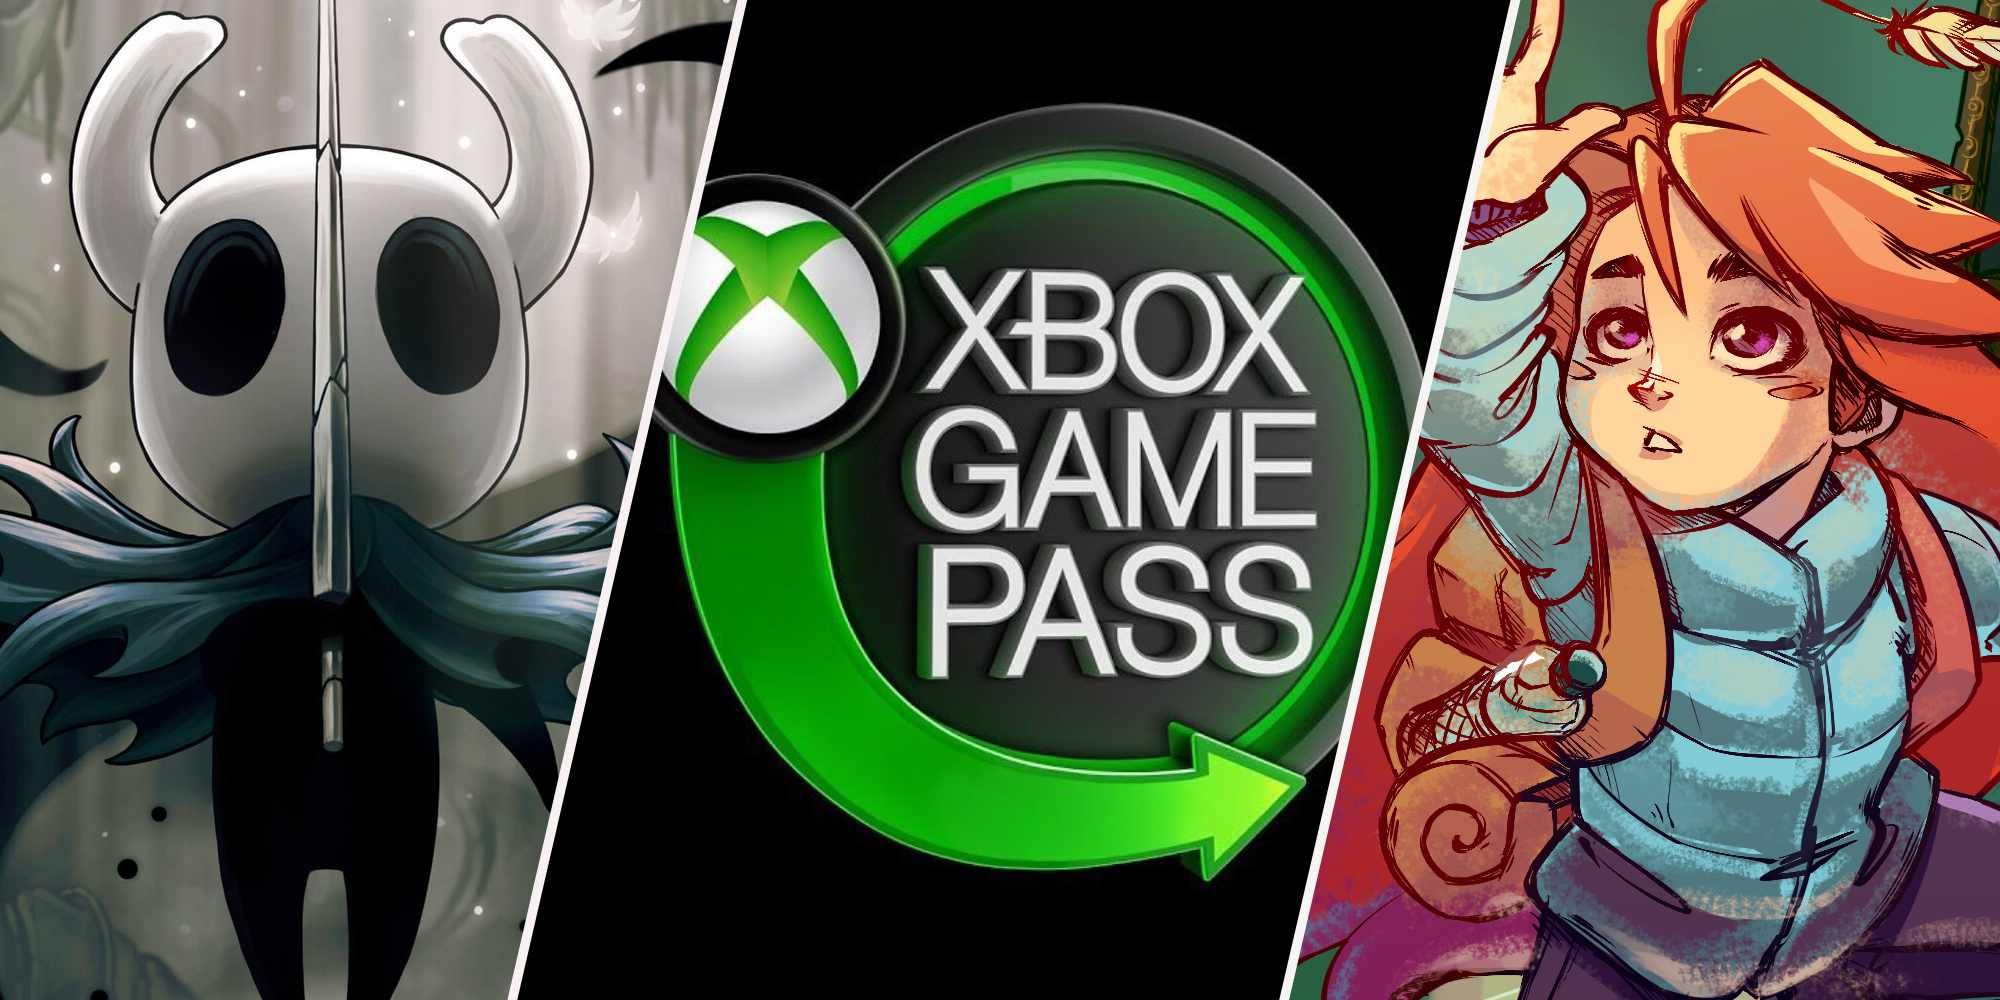 Hollow Knight cover, Xbox game Pass logo, and Celest cover split images side by side